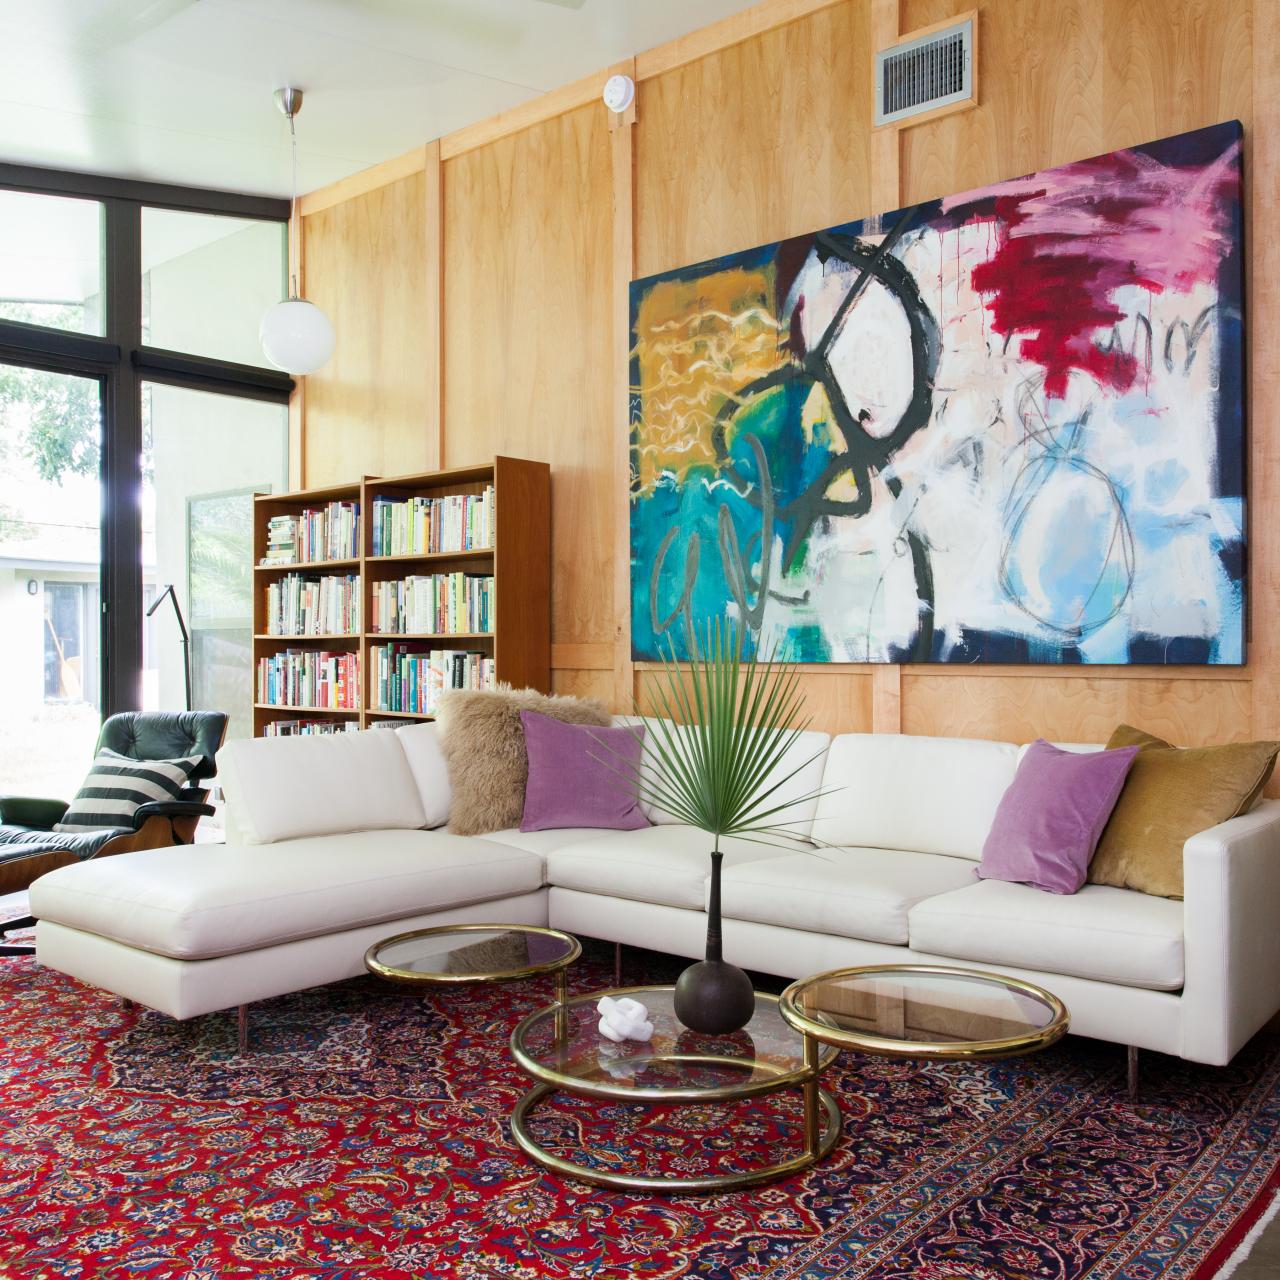 Mid-Century Modern Design: Key Features and History